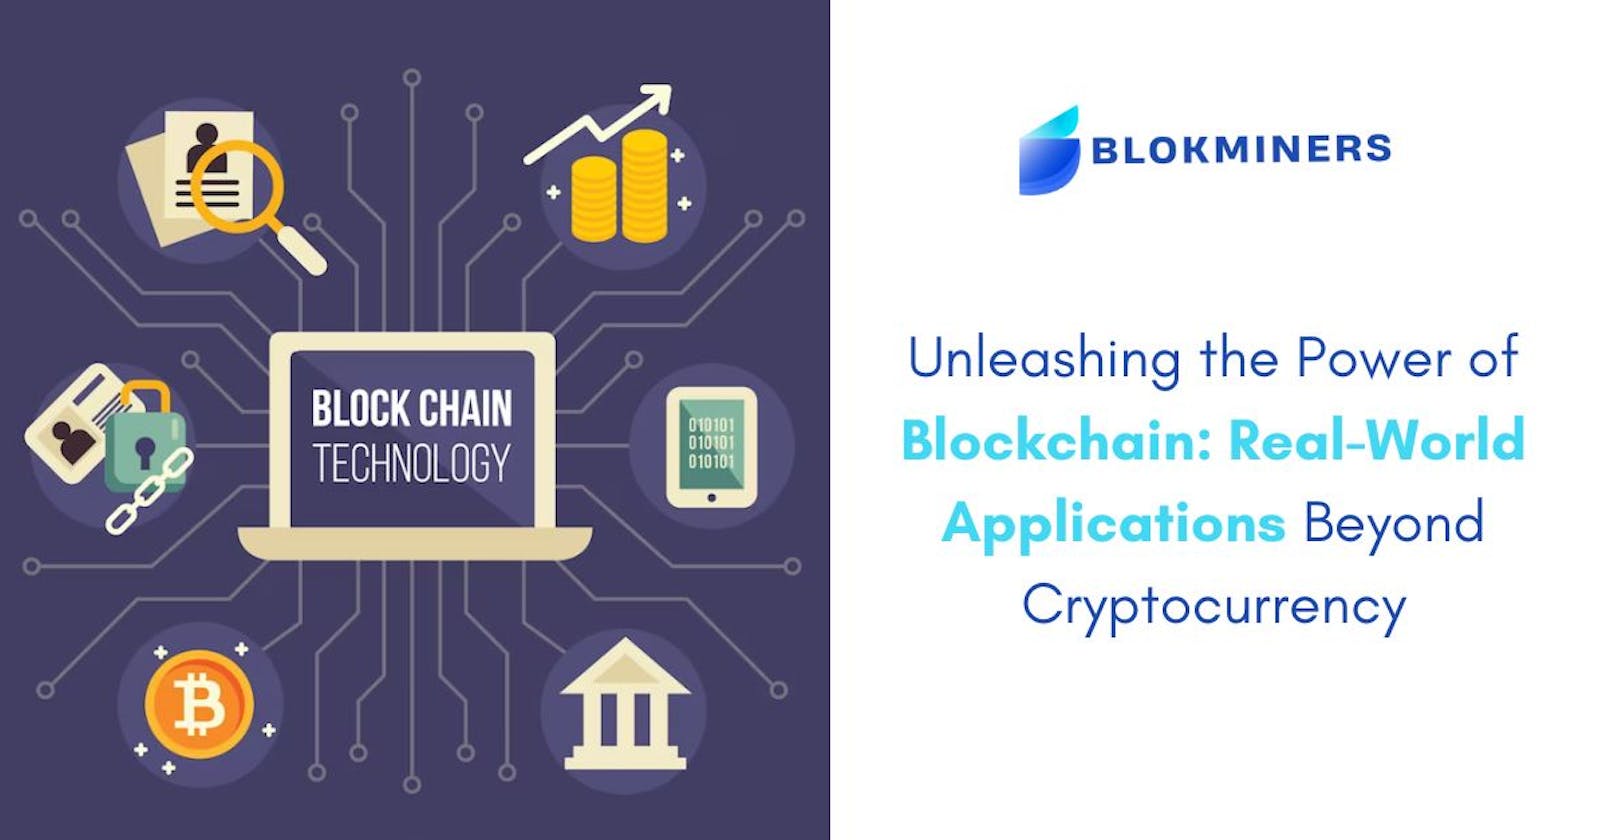 Unleashing the Power of Blockchain: Real-World Applications Beyond Cryptocurrency